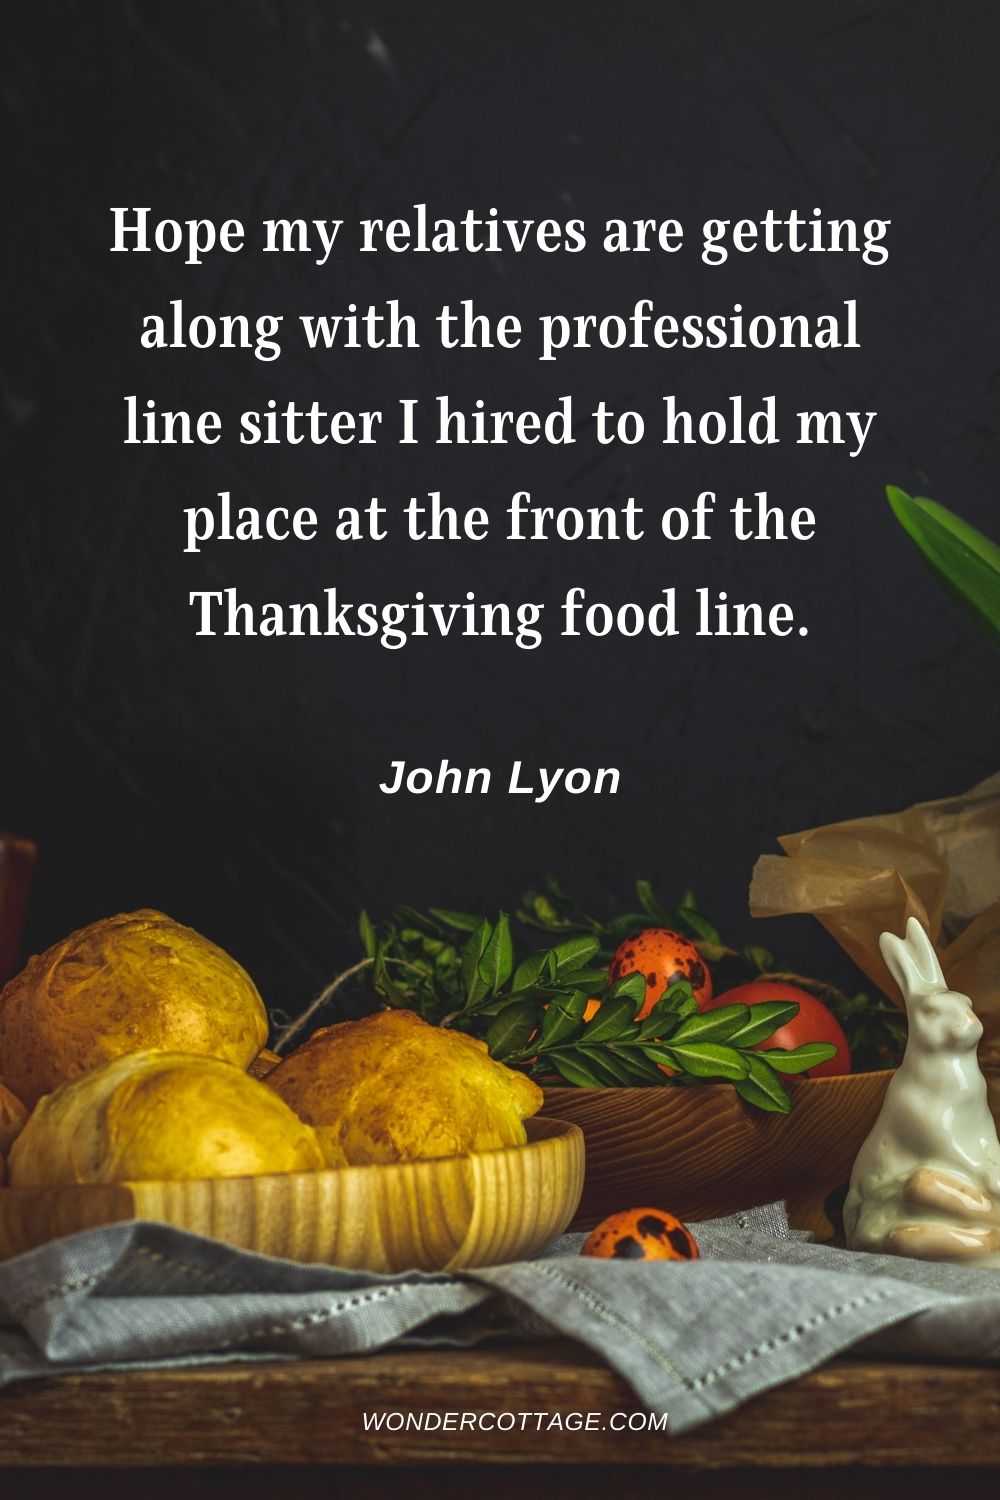 Hope my relatives are getting along with the professional line sitter I hired to hold my place at the front of the Thanksgiving food line. John Lyon